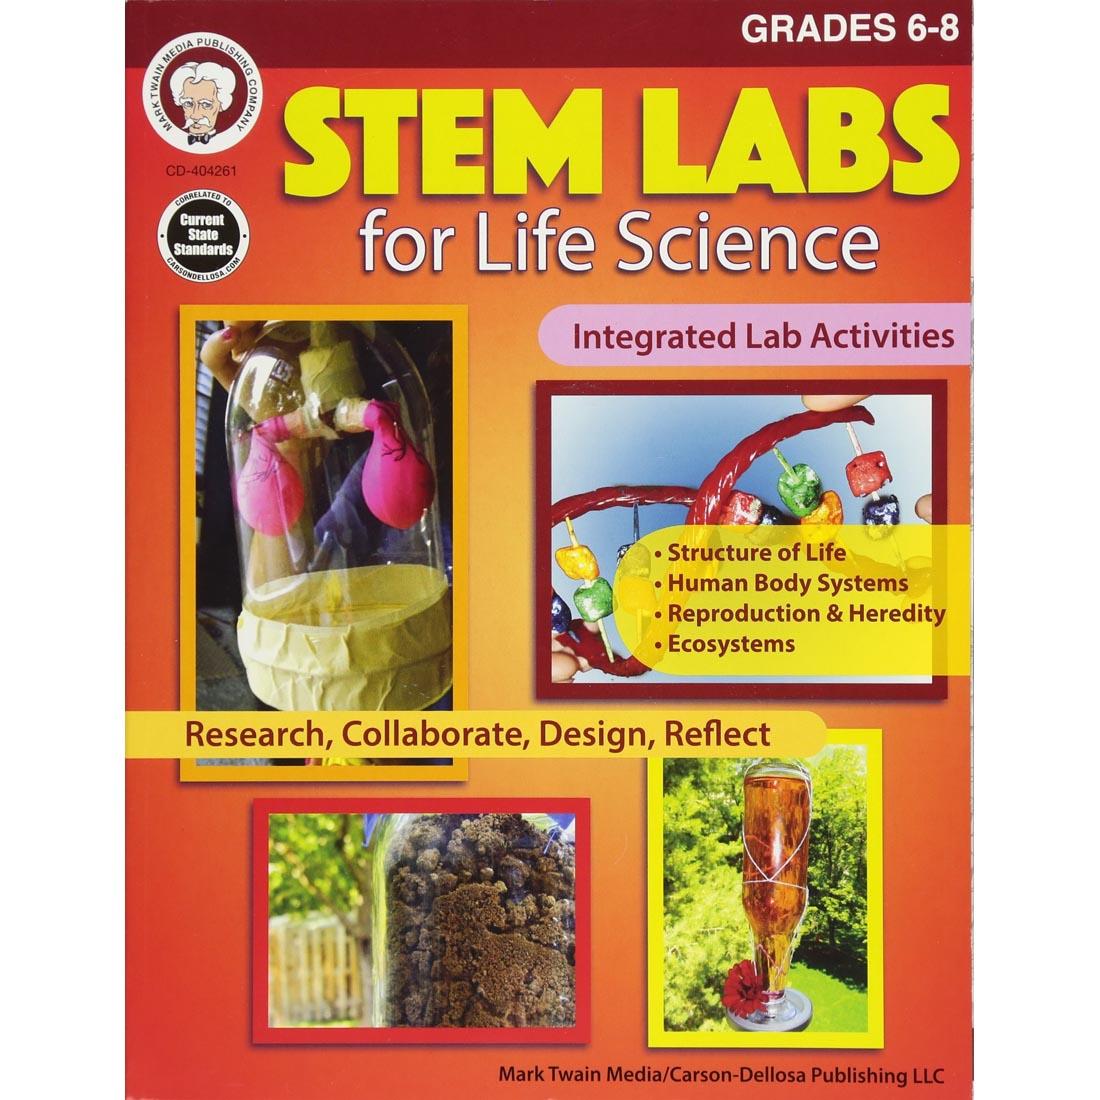 STEM Labs for Life Science by Mark Twain Media